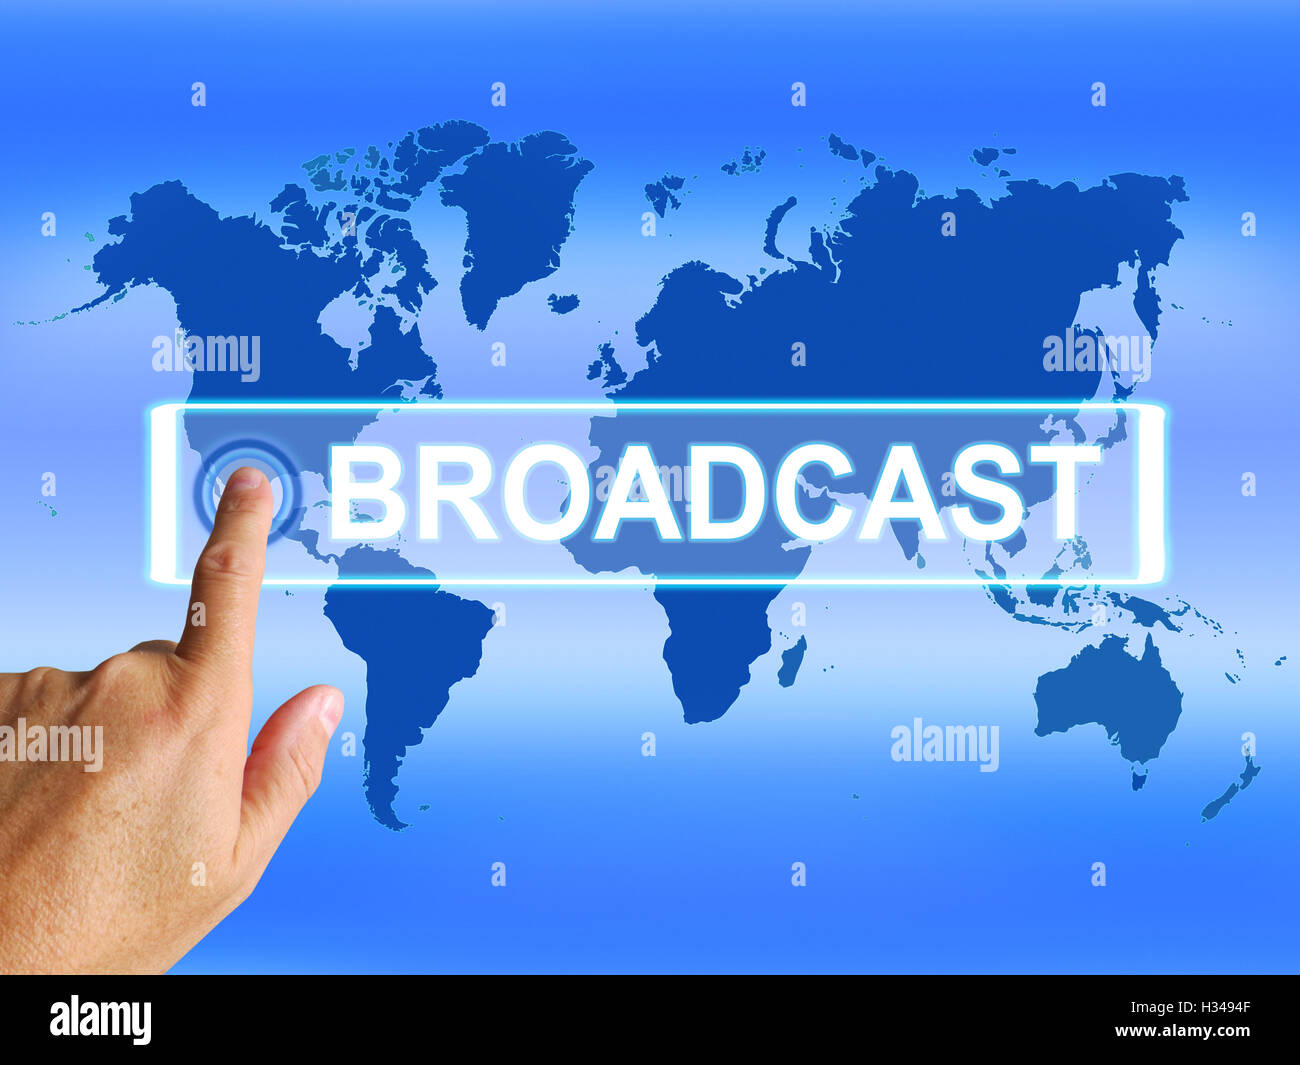 Broadcast Map Shows Internet Broadcasting and Transmission of Ne Stock Photo